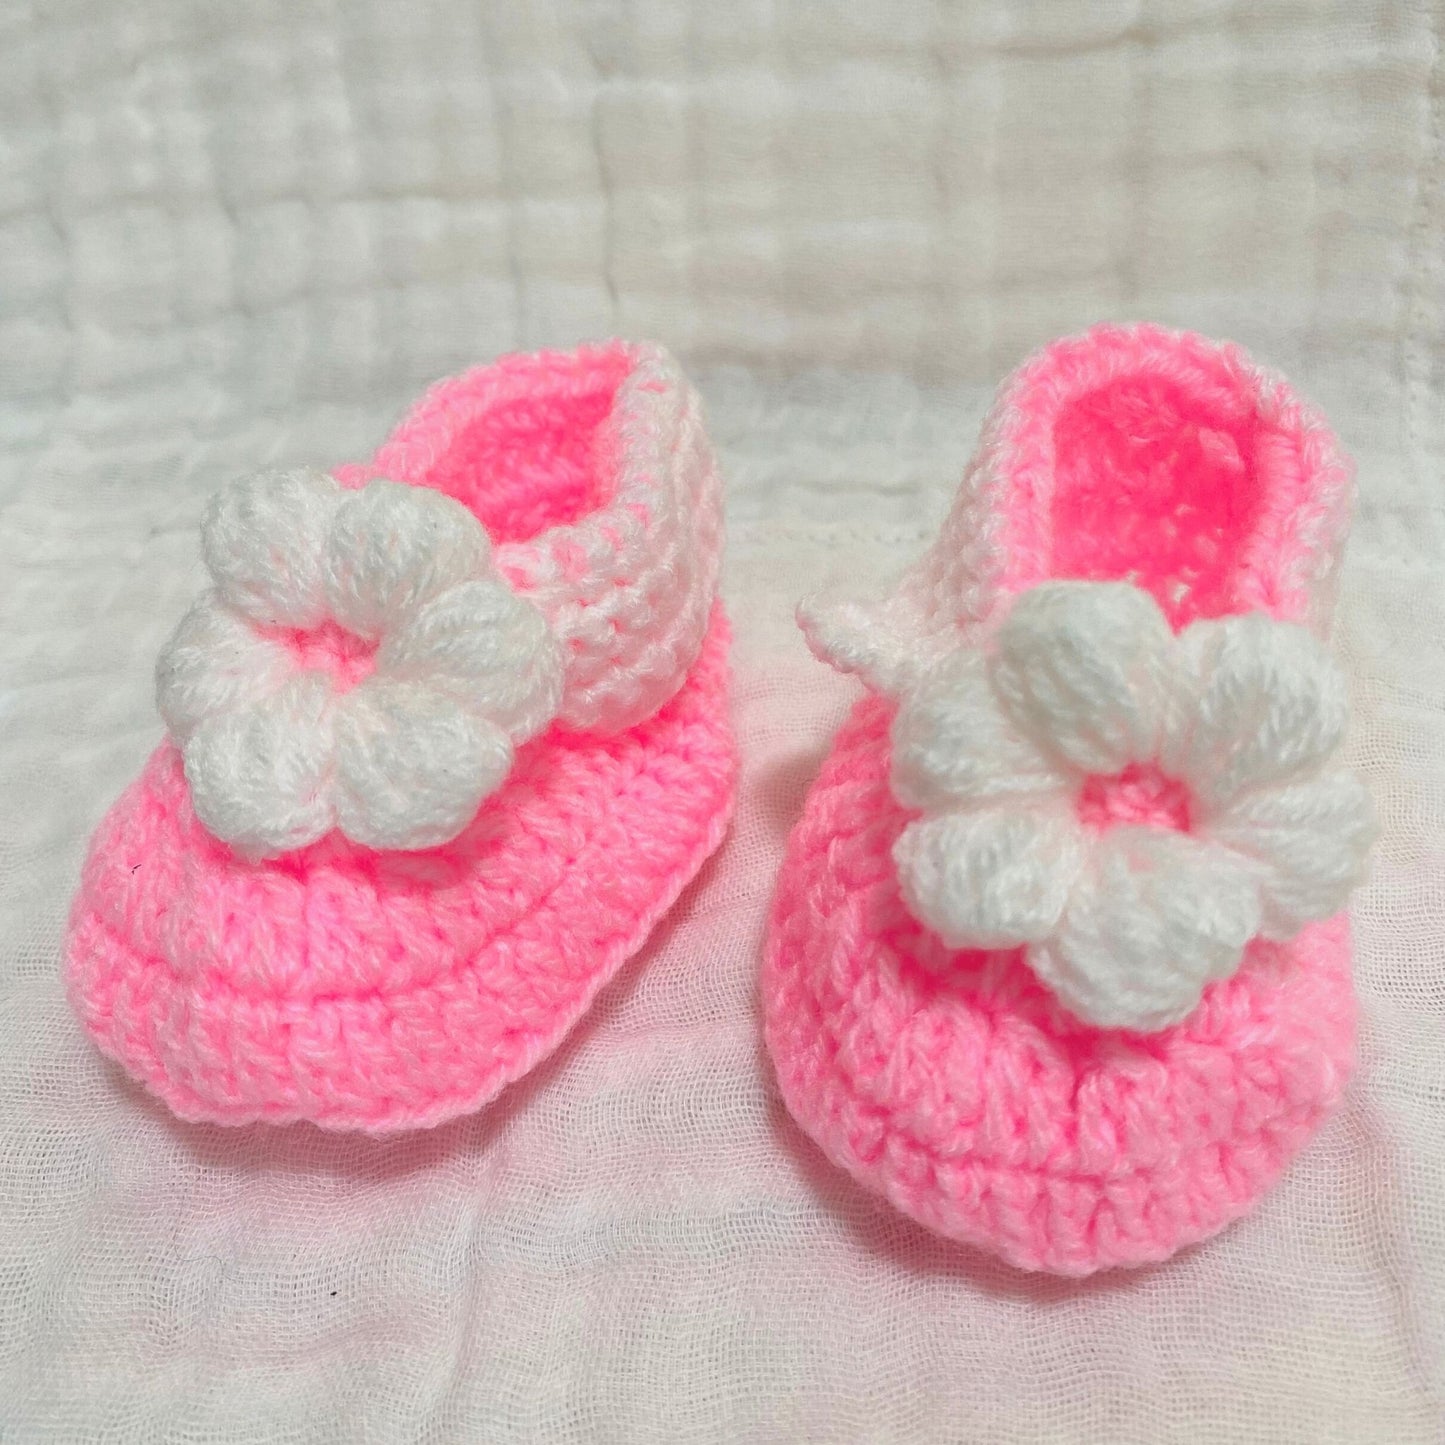 Handmade Crochet / Knitted Baby Shoes/Sandals